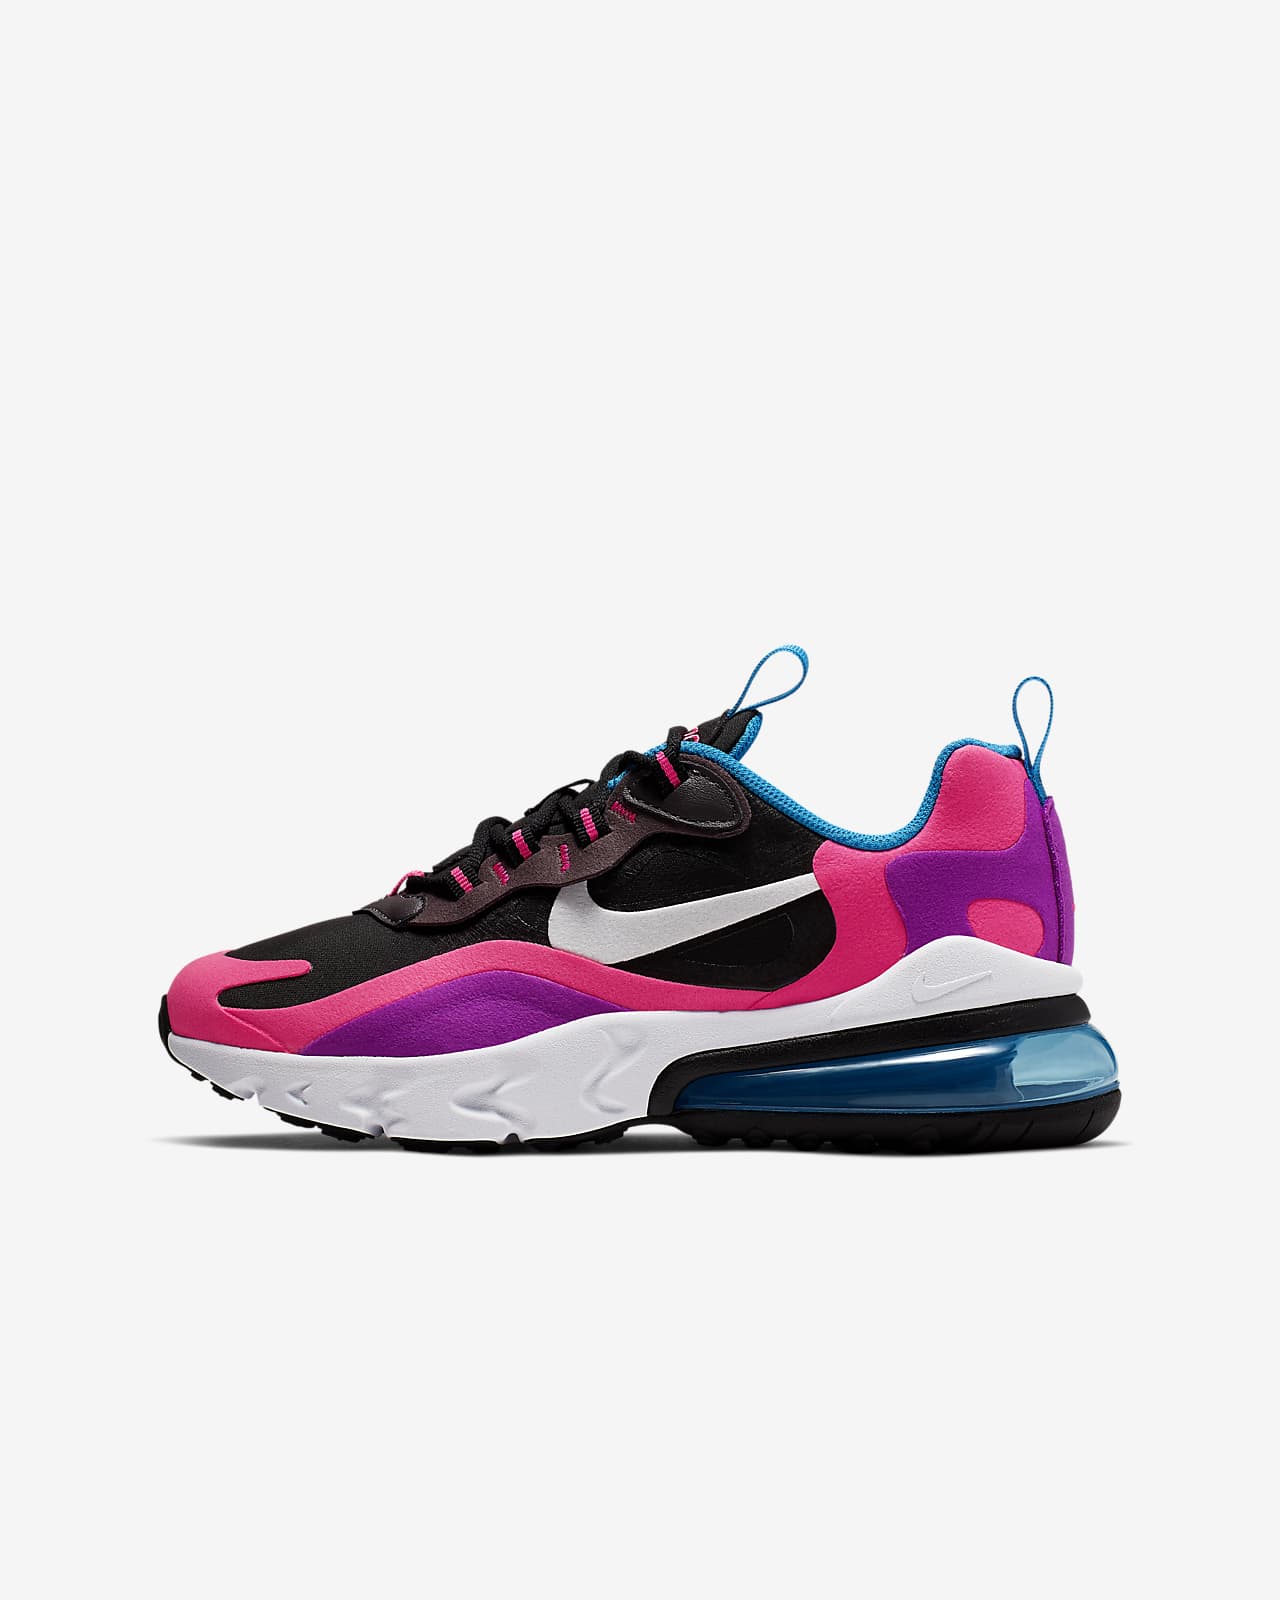 chaussures nike enfant fille air max 270